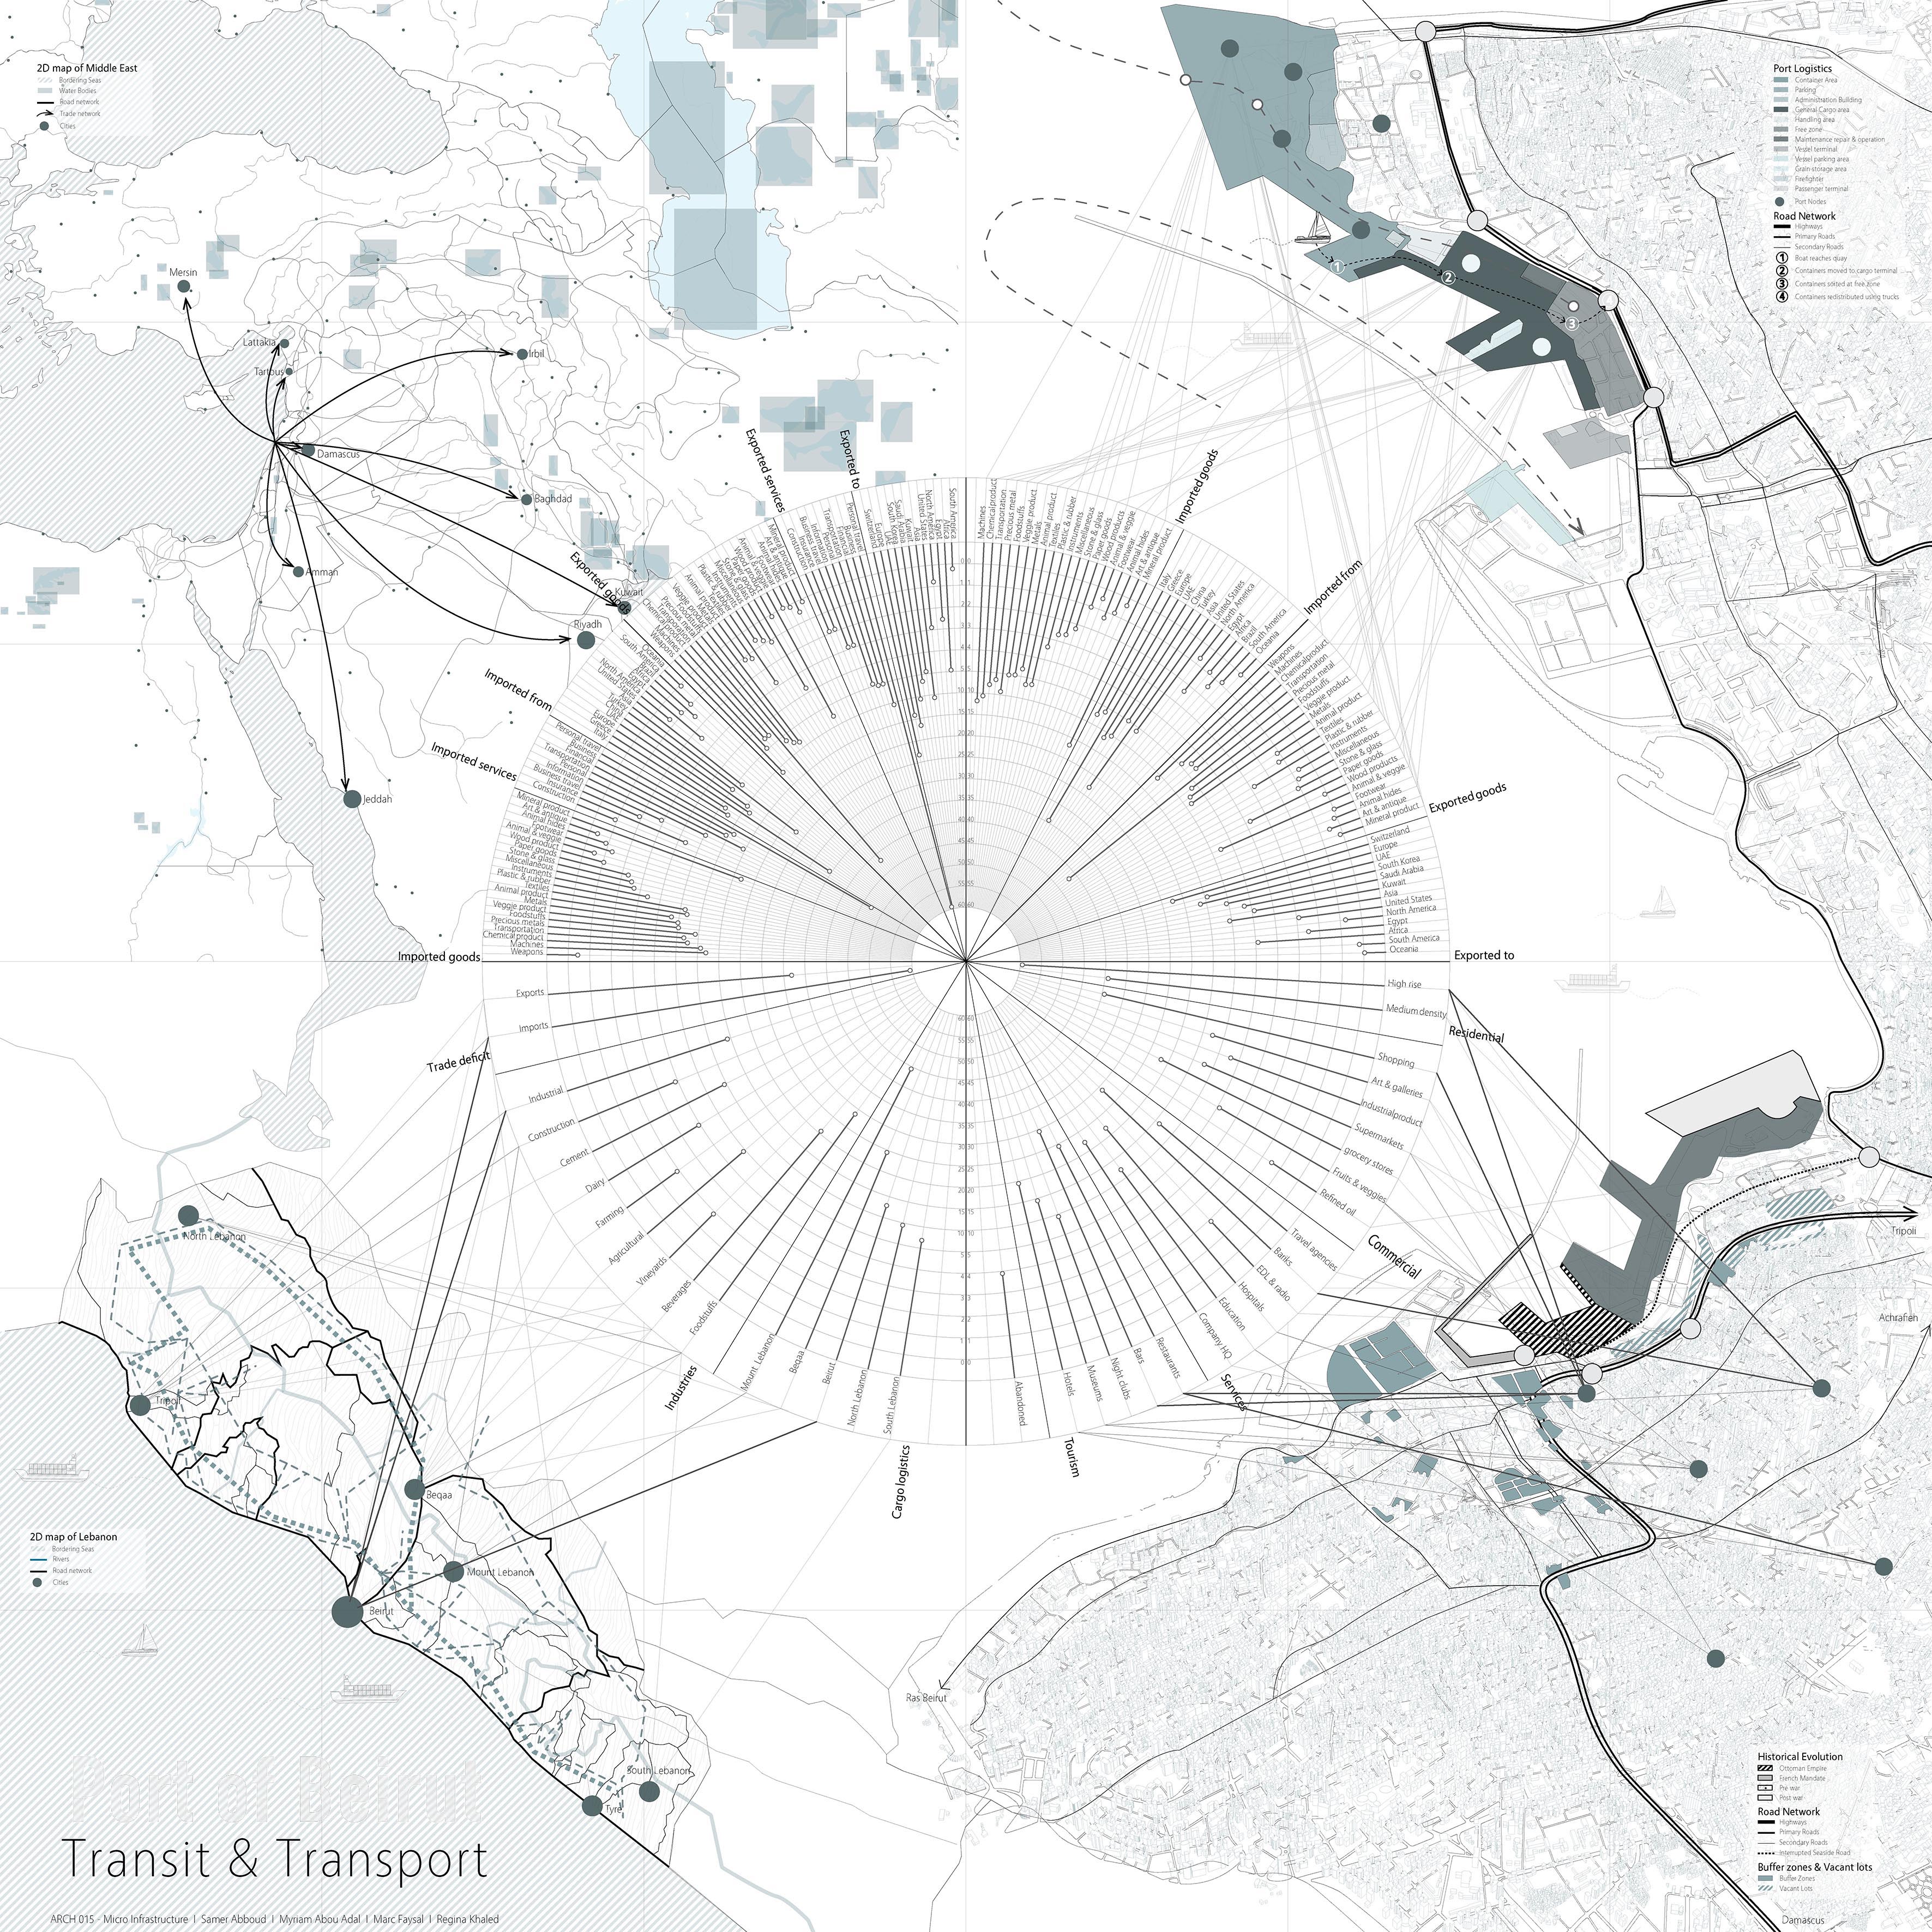 A grey and blue, data-heavy map shows "transit and transport" information in the Port of Beirut. Text radiates out from the center, overlaid on a map of the area.